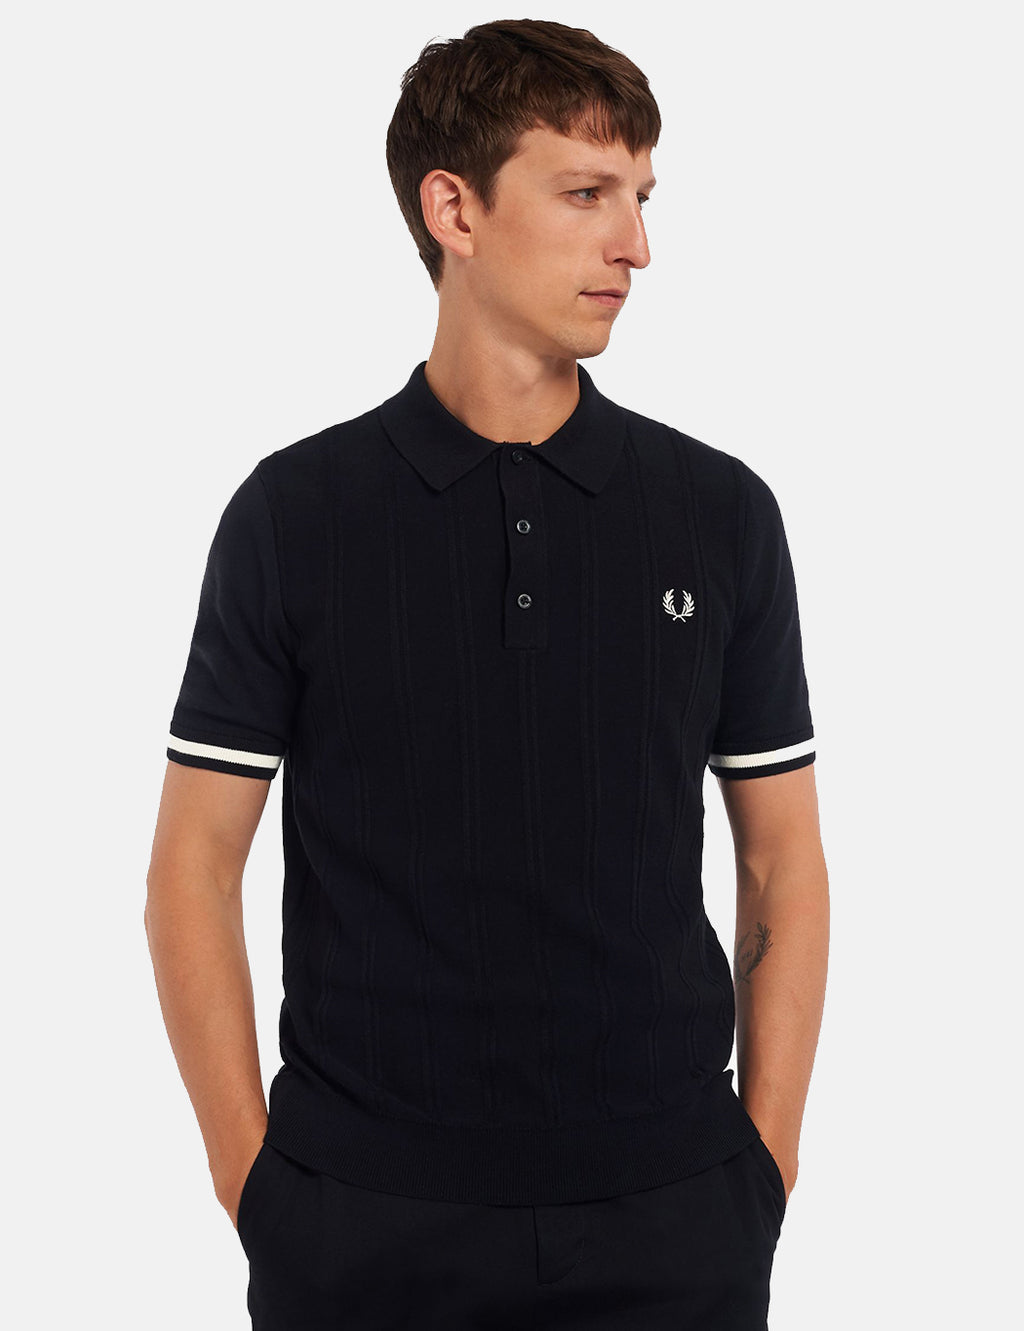 Fred Perry Tipping Texture Knitted Shirt - Black I URBAN EXCESS.